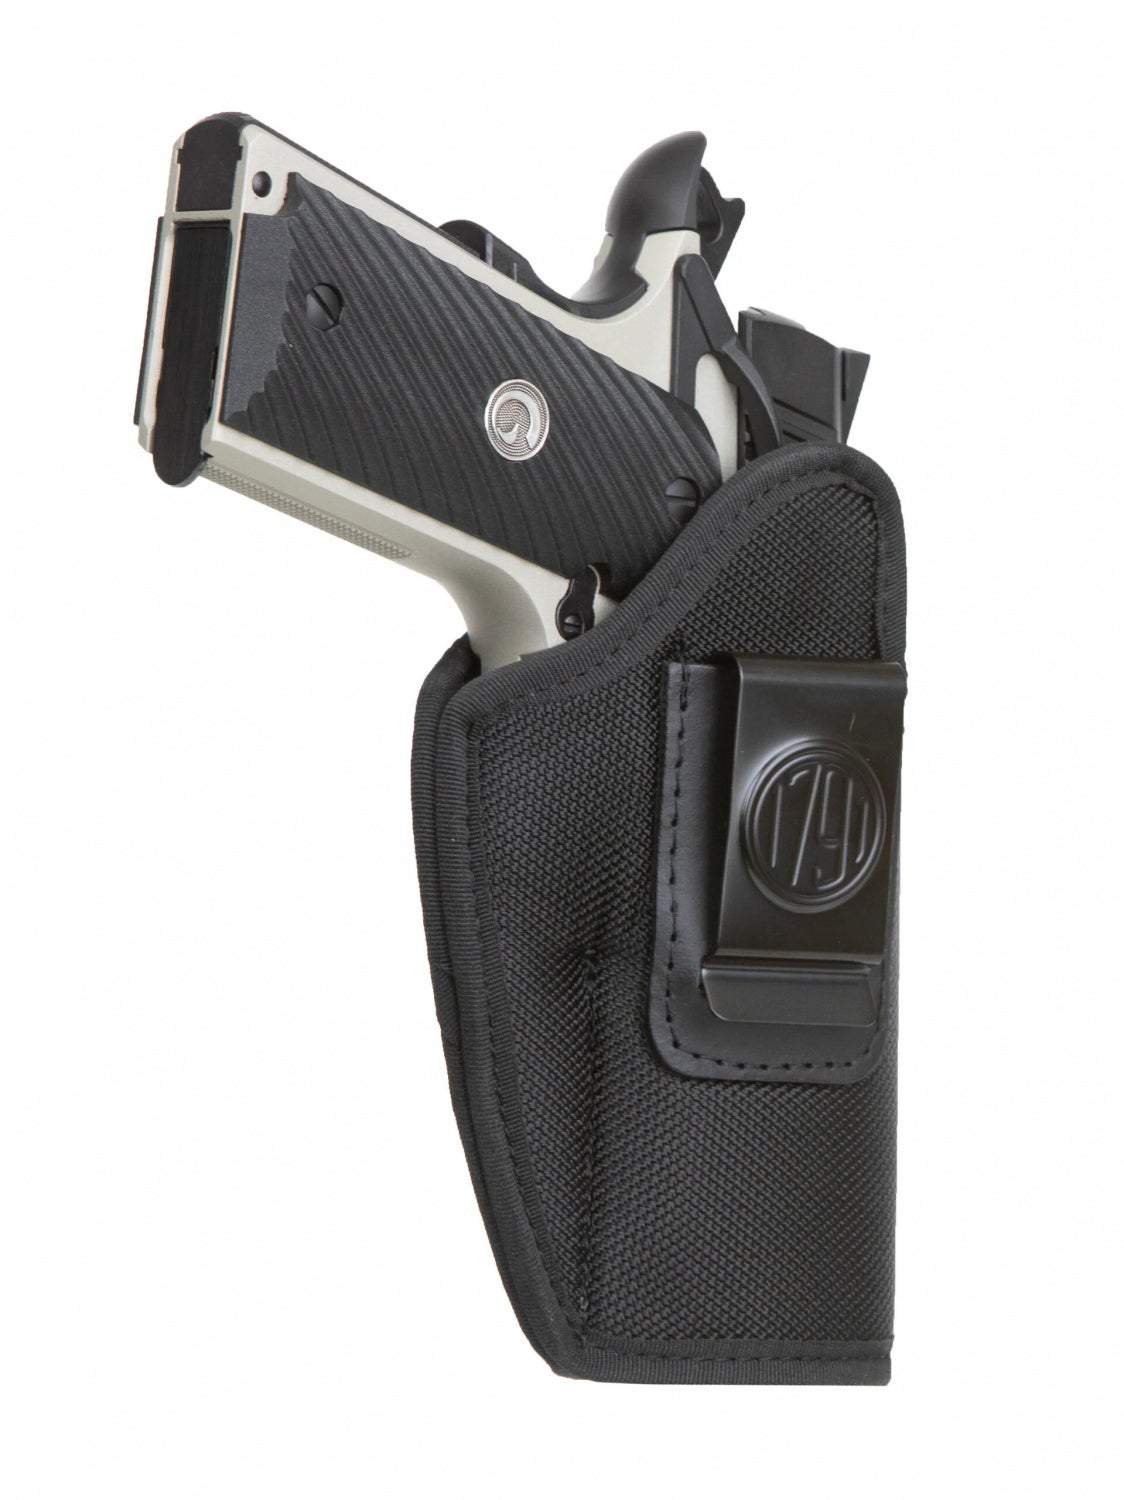 One of the compatible holster models is the Premium Ballistic Nylon Holster Size 4, shown here containing a Girsan 1911.